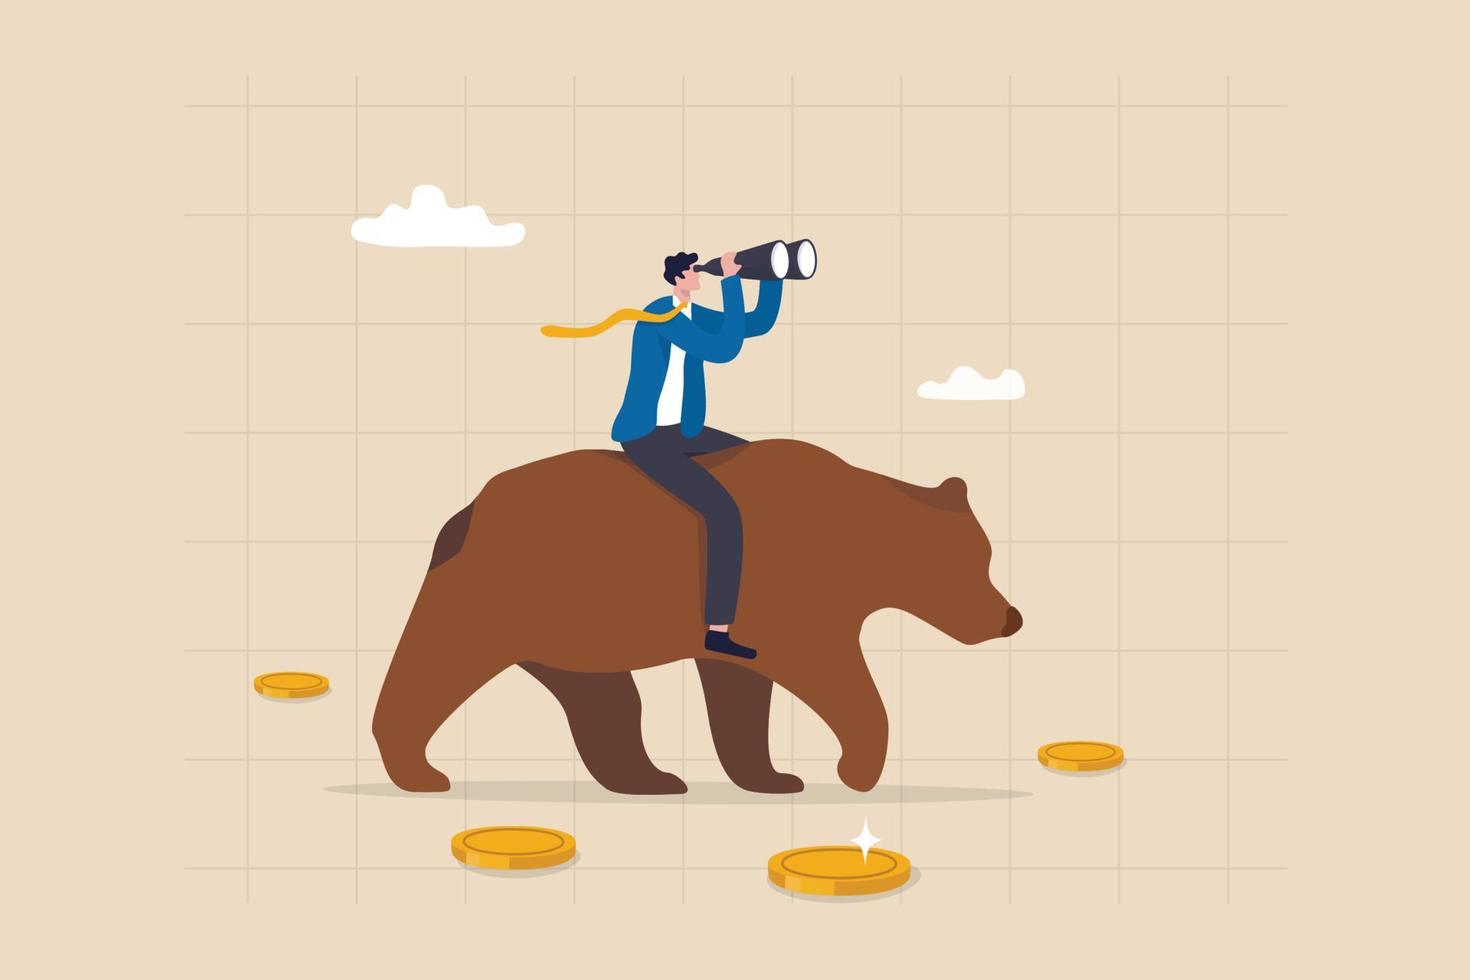 Bear market investment, looking for profit in market fall, crypto or stock trading strategy in bearish market, analyze or forecast trend, businessman investor riding bear looking through binoculars. vector